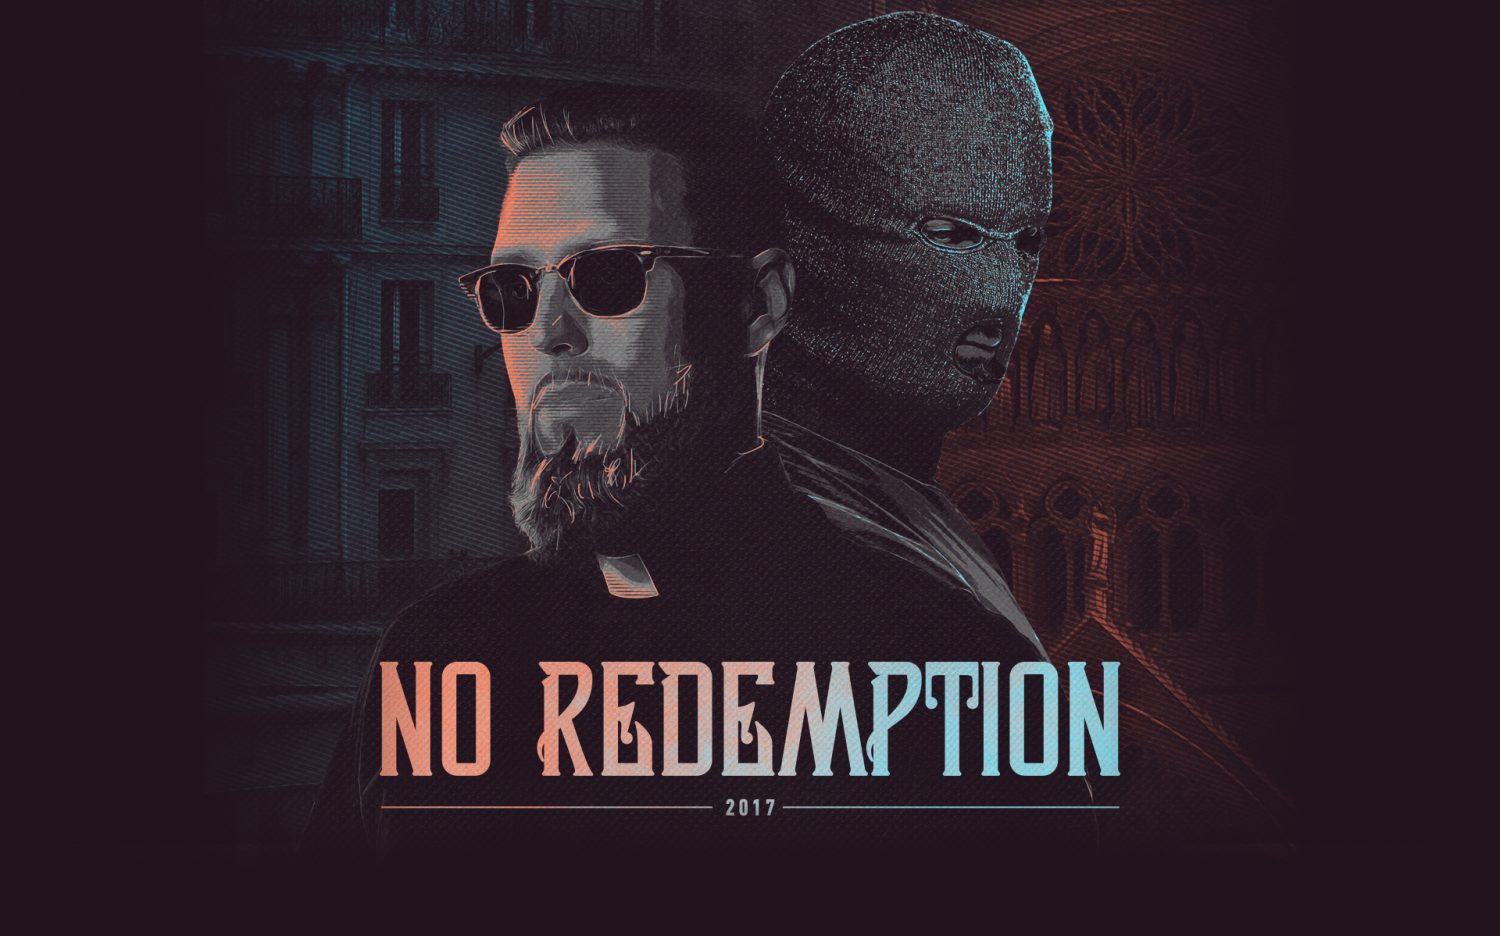 Tchami & Malaa - No Redemption EP [Bass House/G-House]